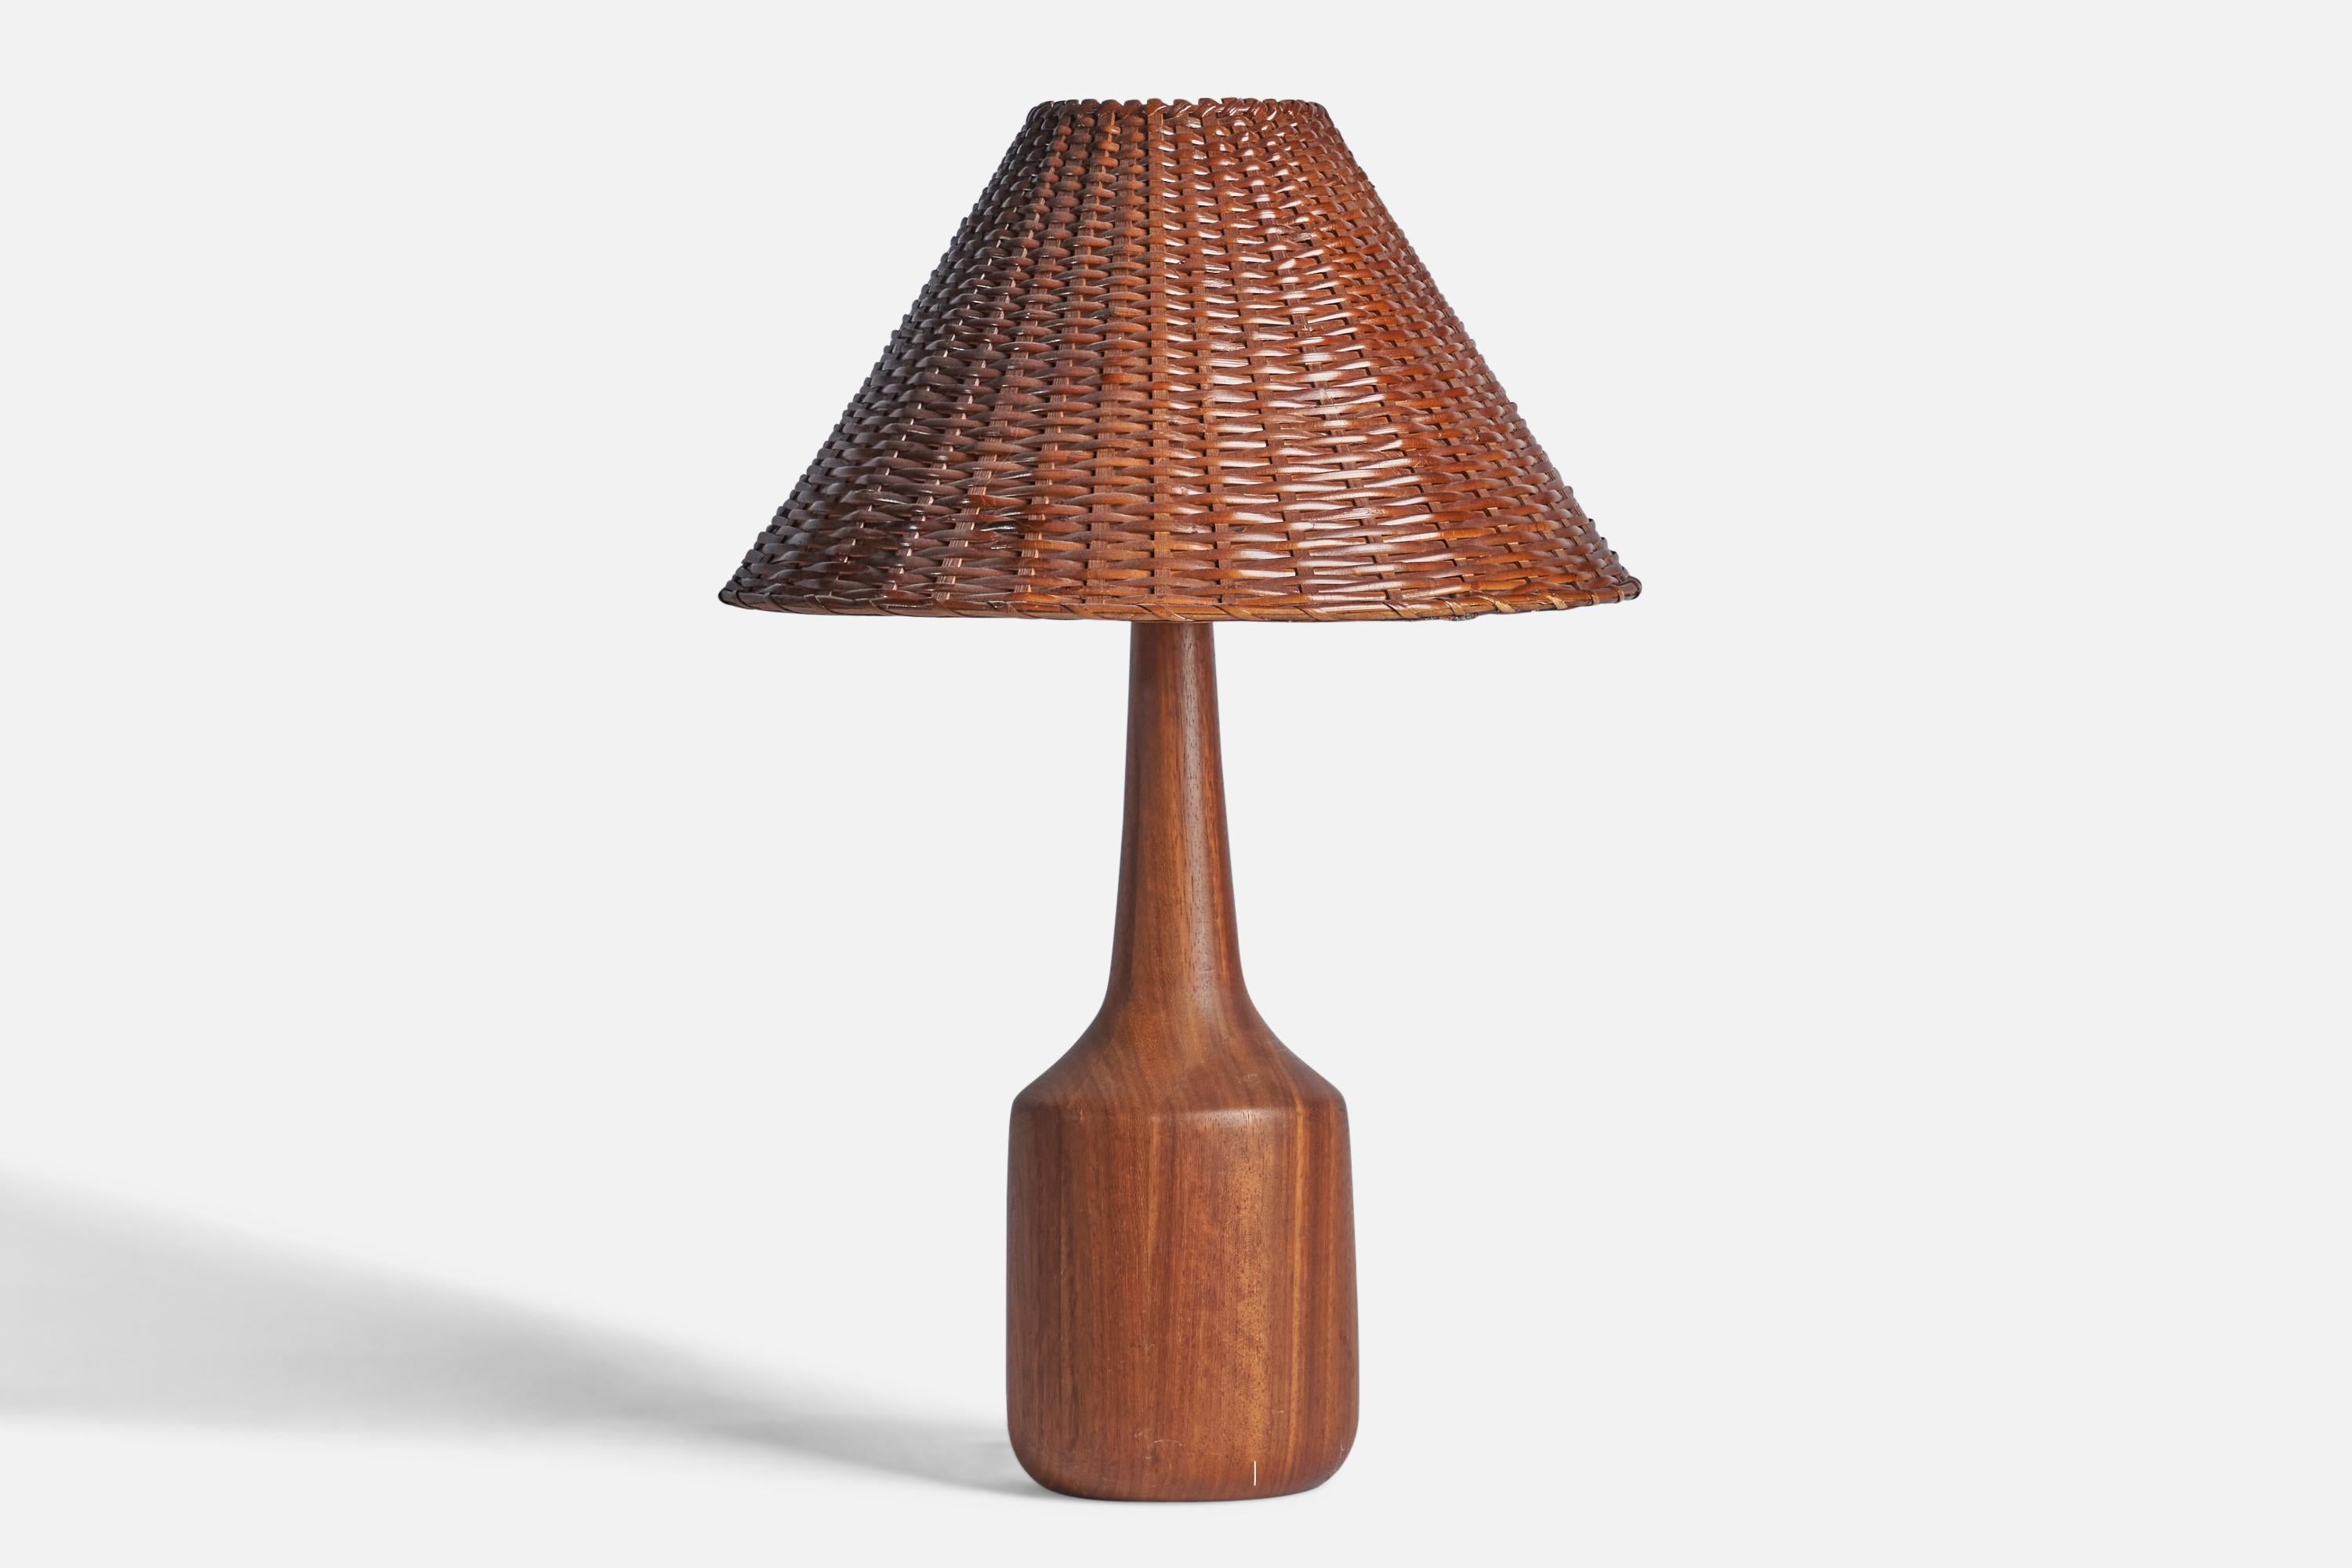 A teak and rattan table lamp designed and produced in the US, 1950s.

Overall Dimensions (inches): 28.5” H x 19” Diameter
Bulb Specifications: E-26 Bulb
Number of Sockets: 1
All lighting will be converted for US usage. We are unable to confirm that